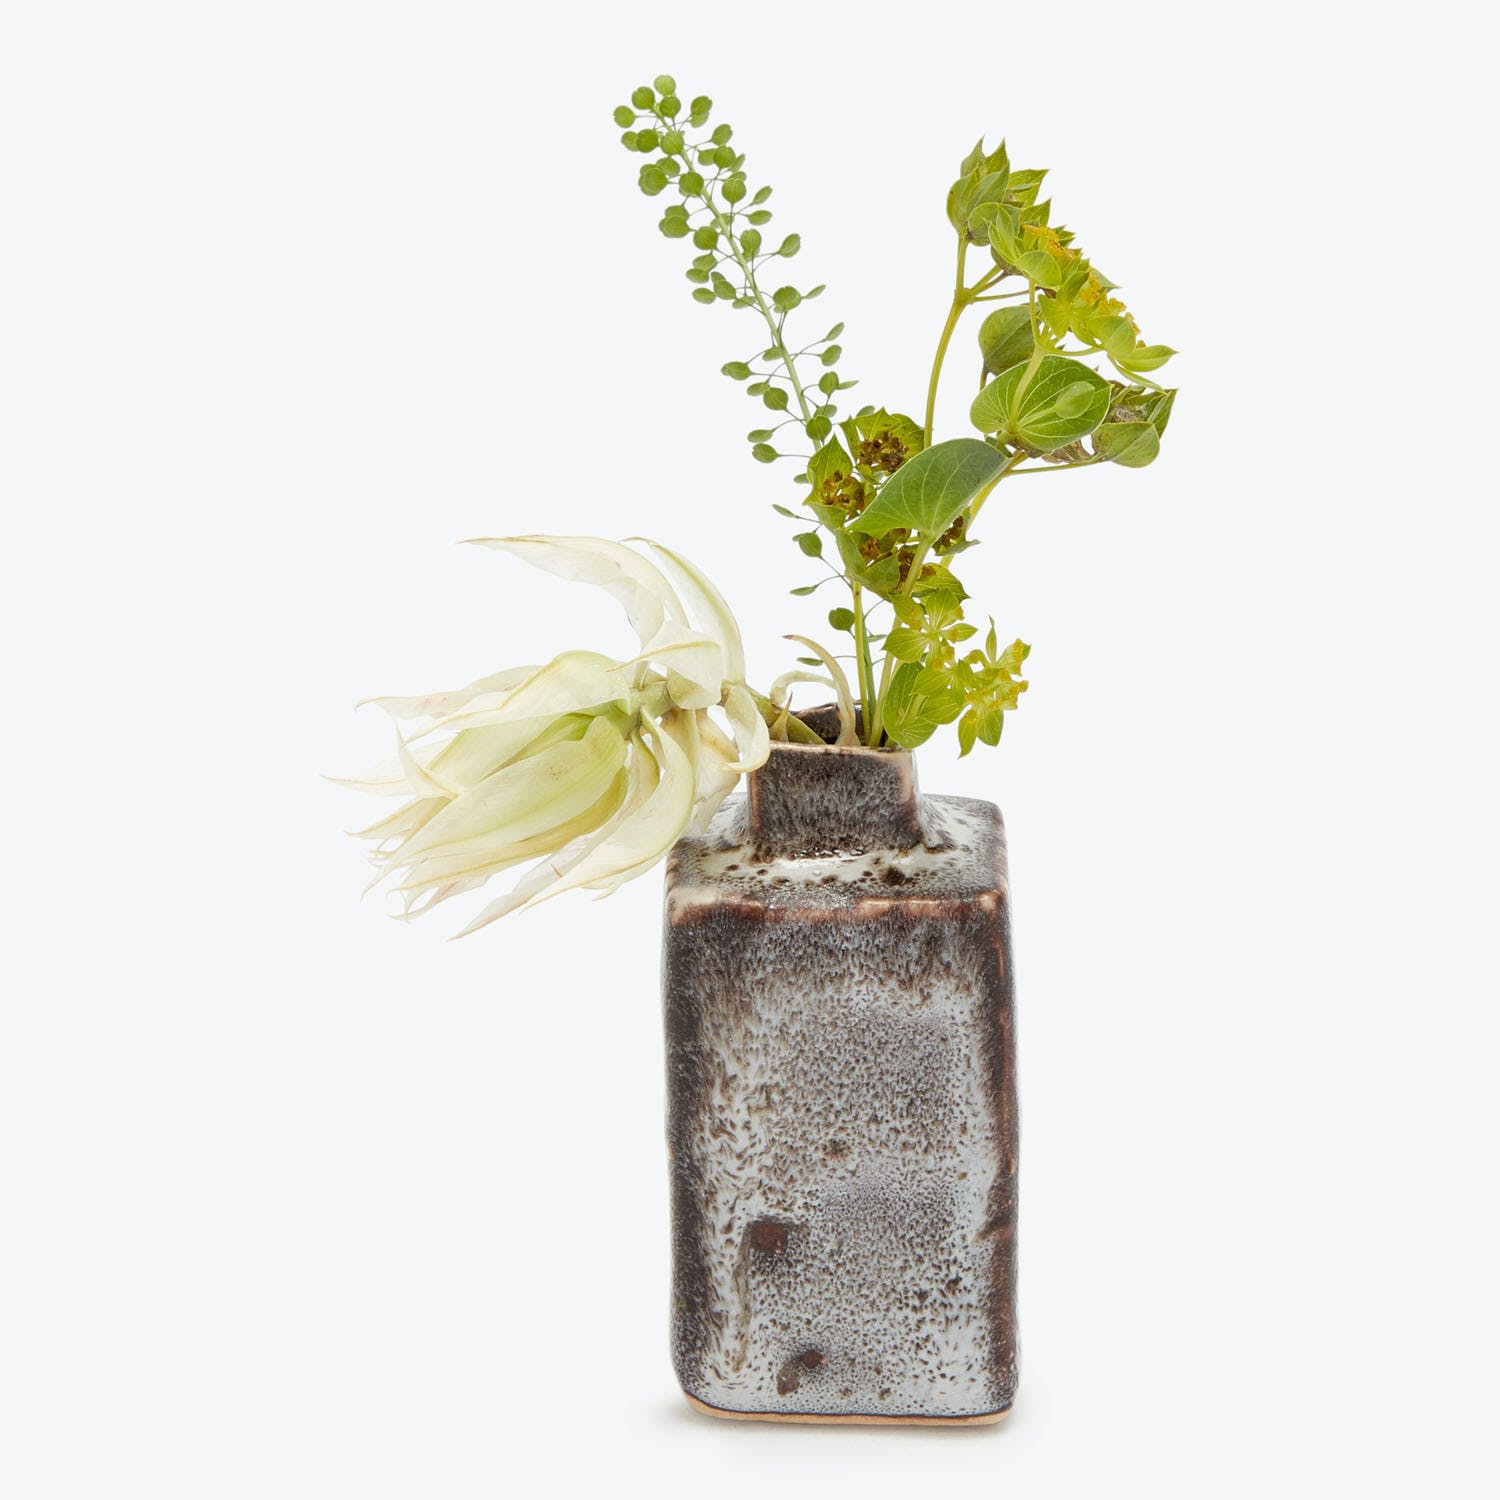 Ceramic vase with distressed glaze holds white flower and greenery.